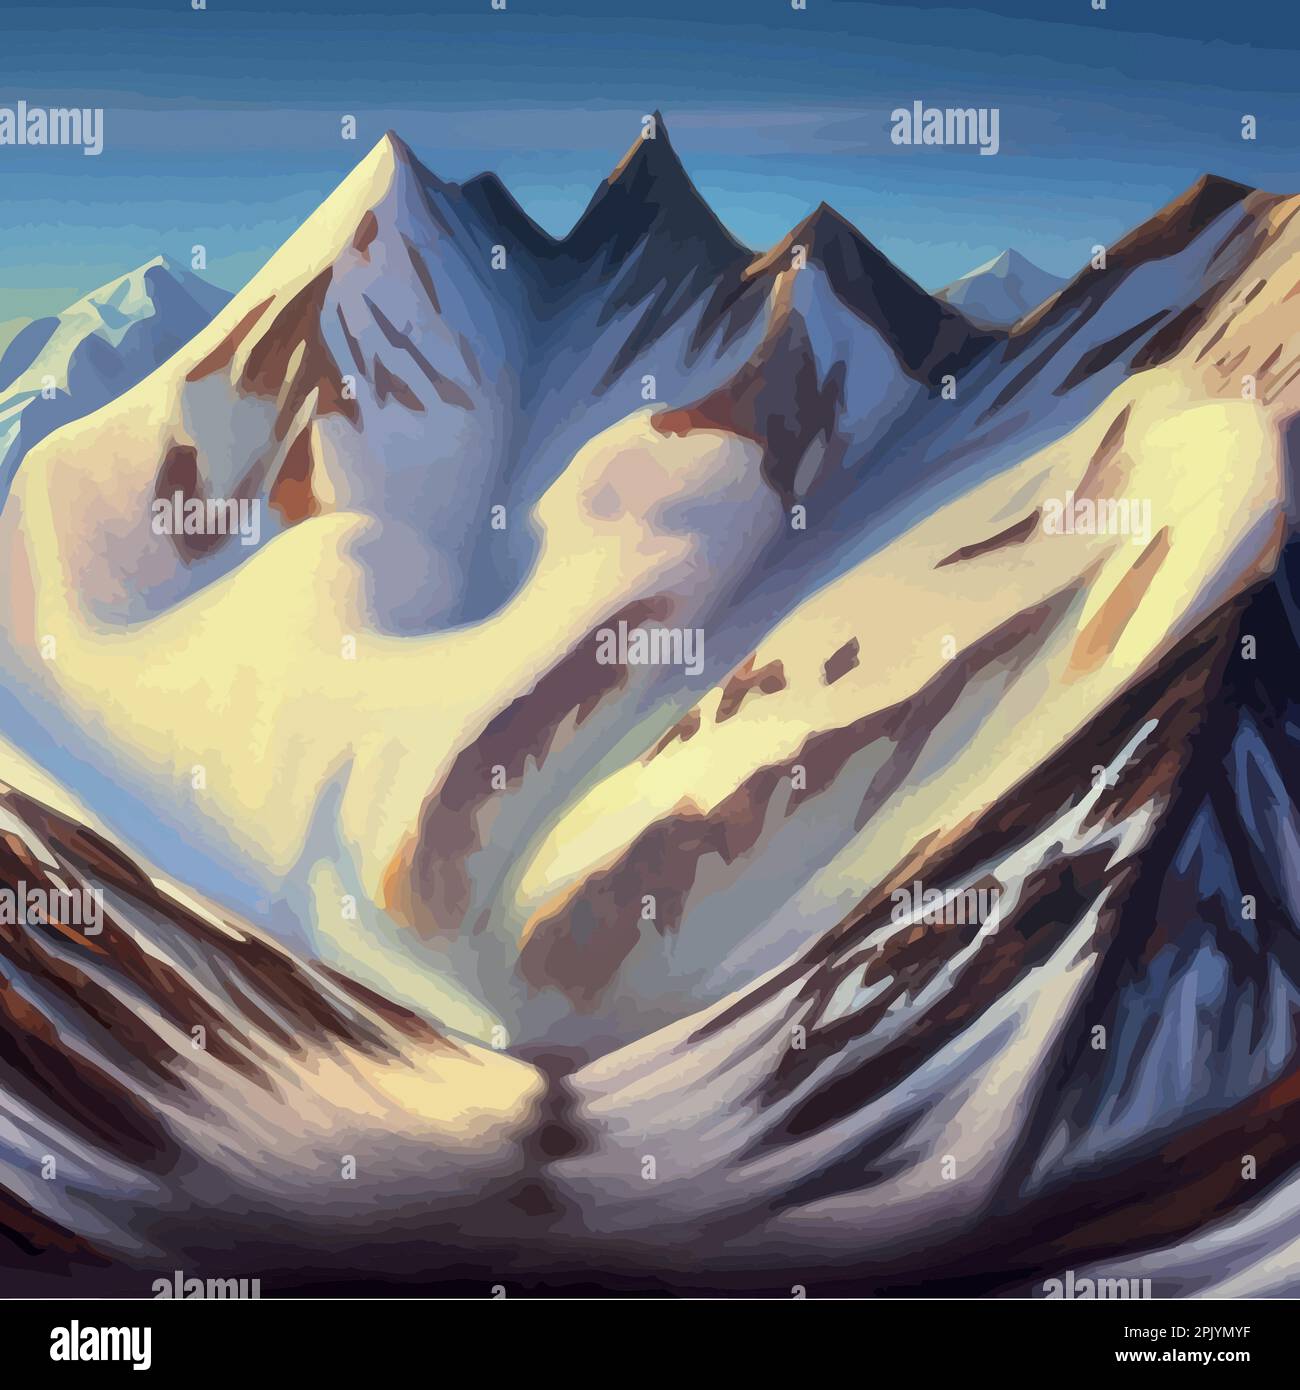 Stunning Snow Capped Mountains Mountain Landscape Alpine Snow Vector